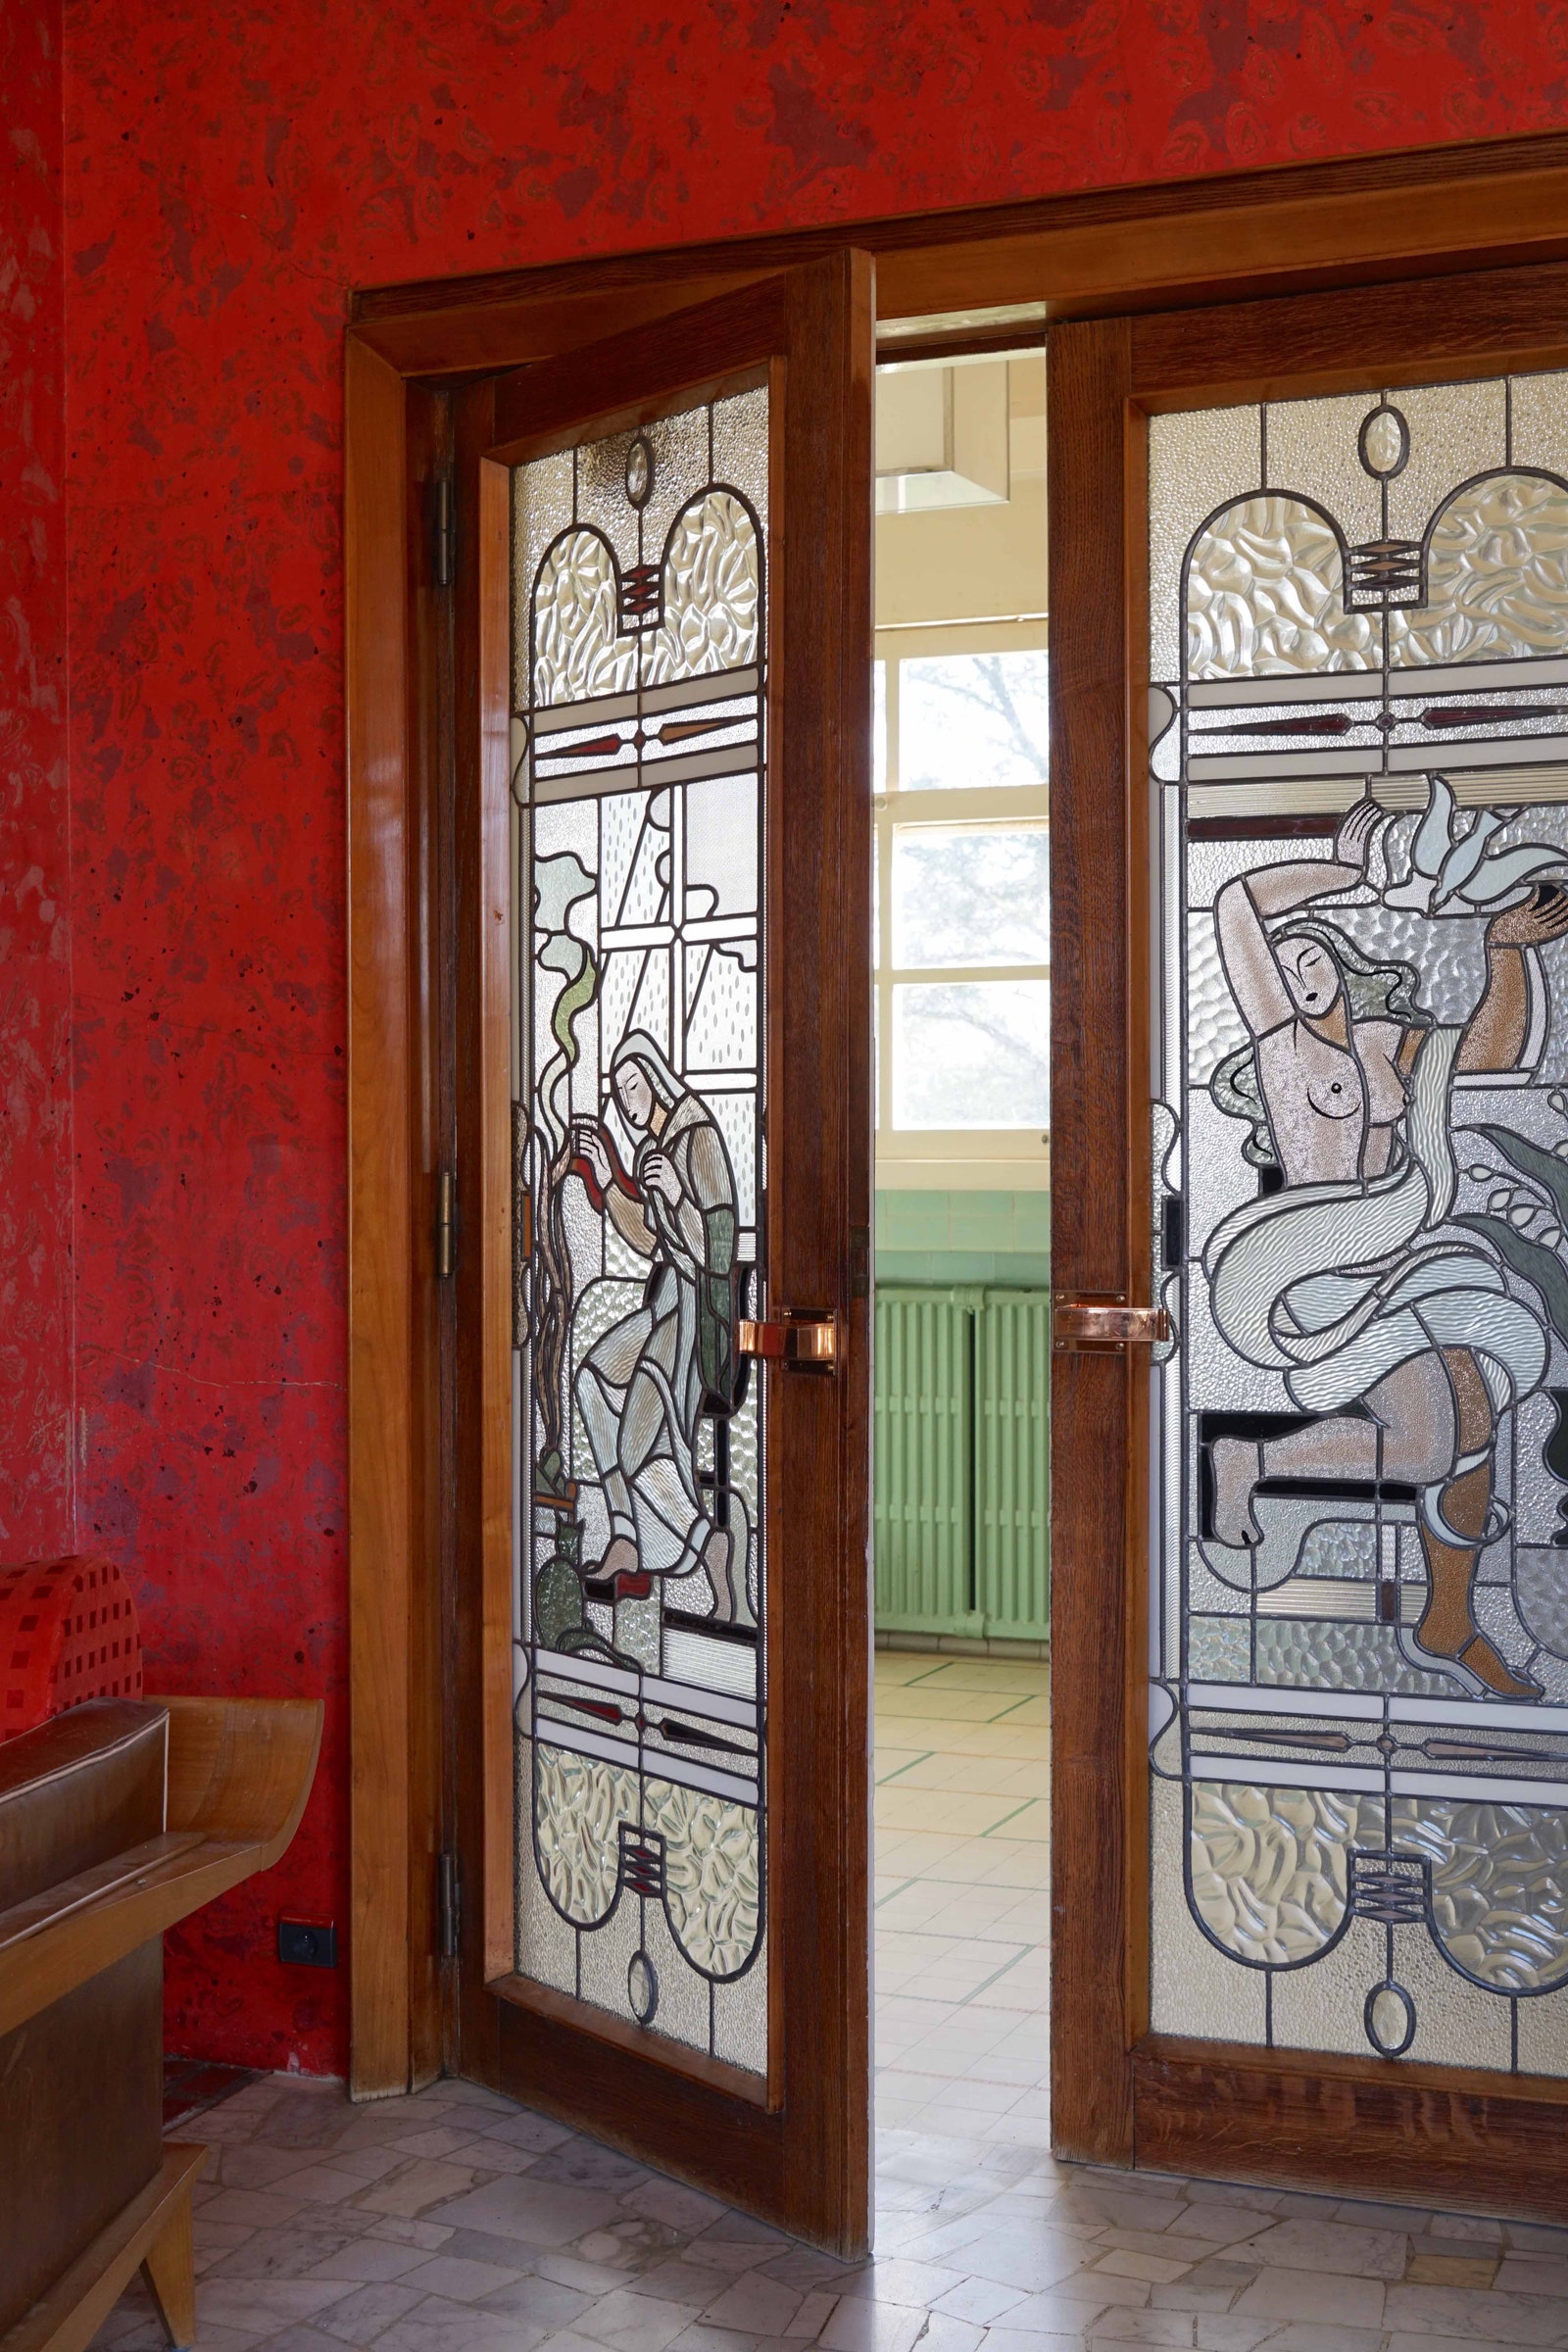 A perfectly preserved Art Deco lodge is a time capsule of the 1930s